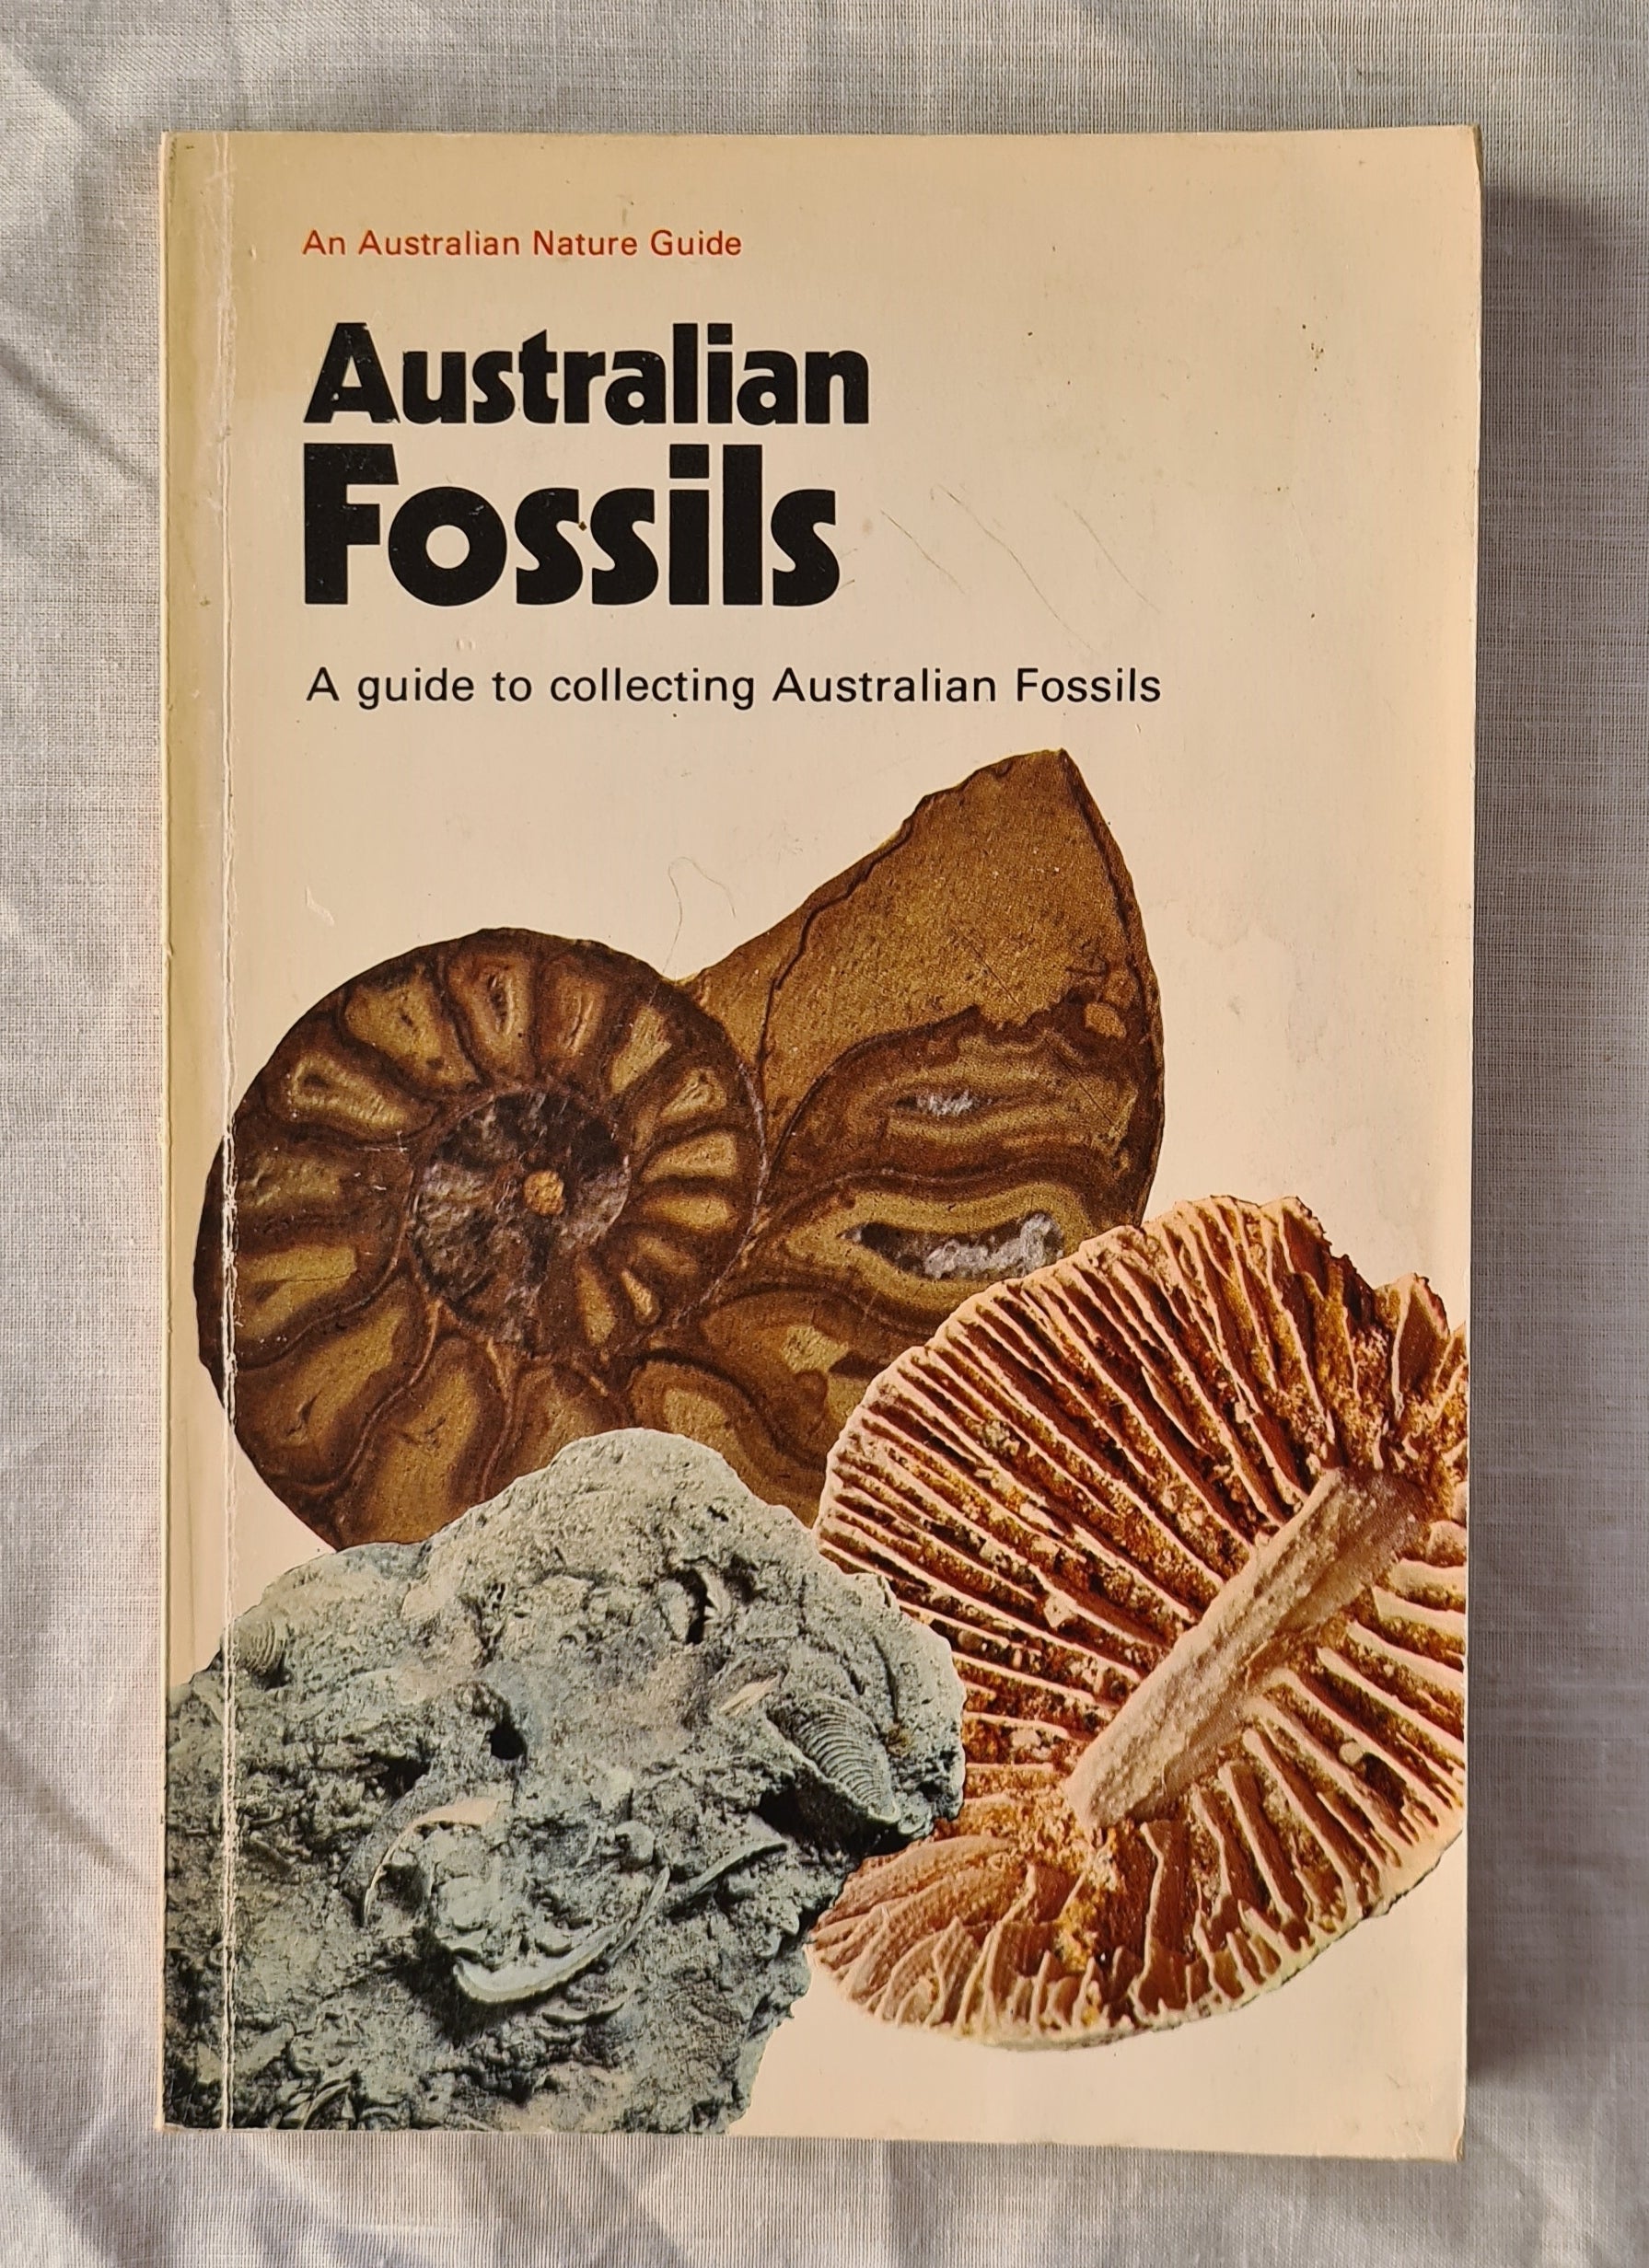 Australian Fossils  A guide to collecting Australian Fossils  by Douglas M Sone and Sharman N Bawden